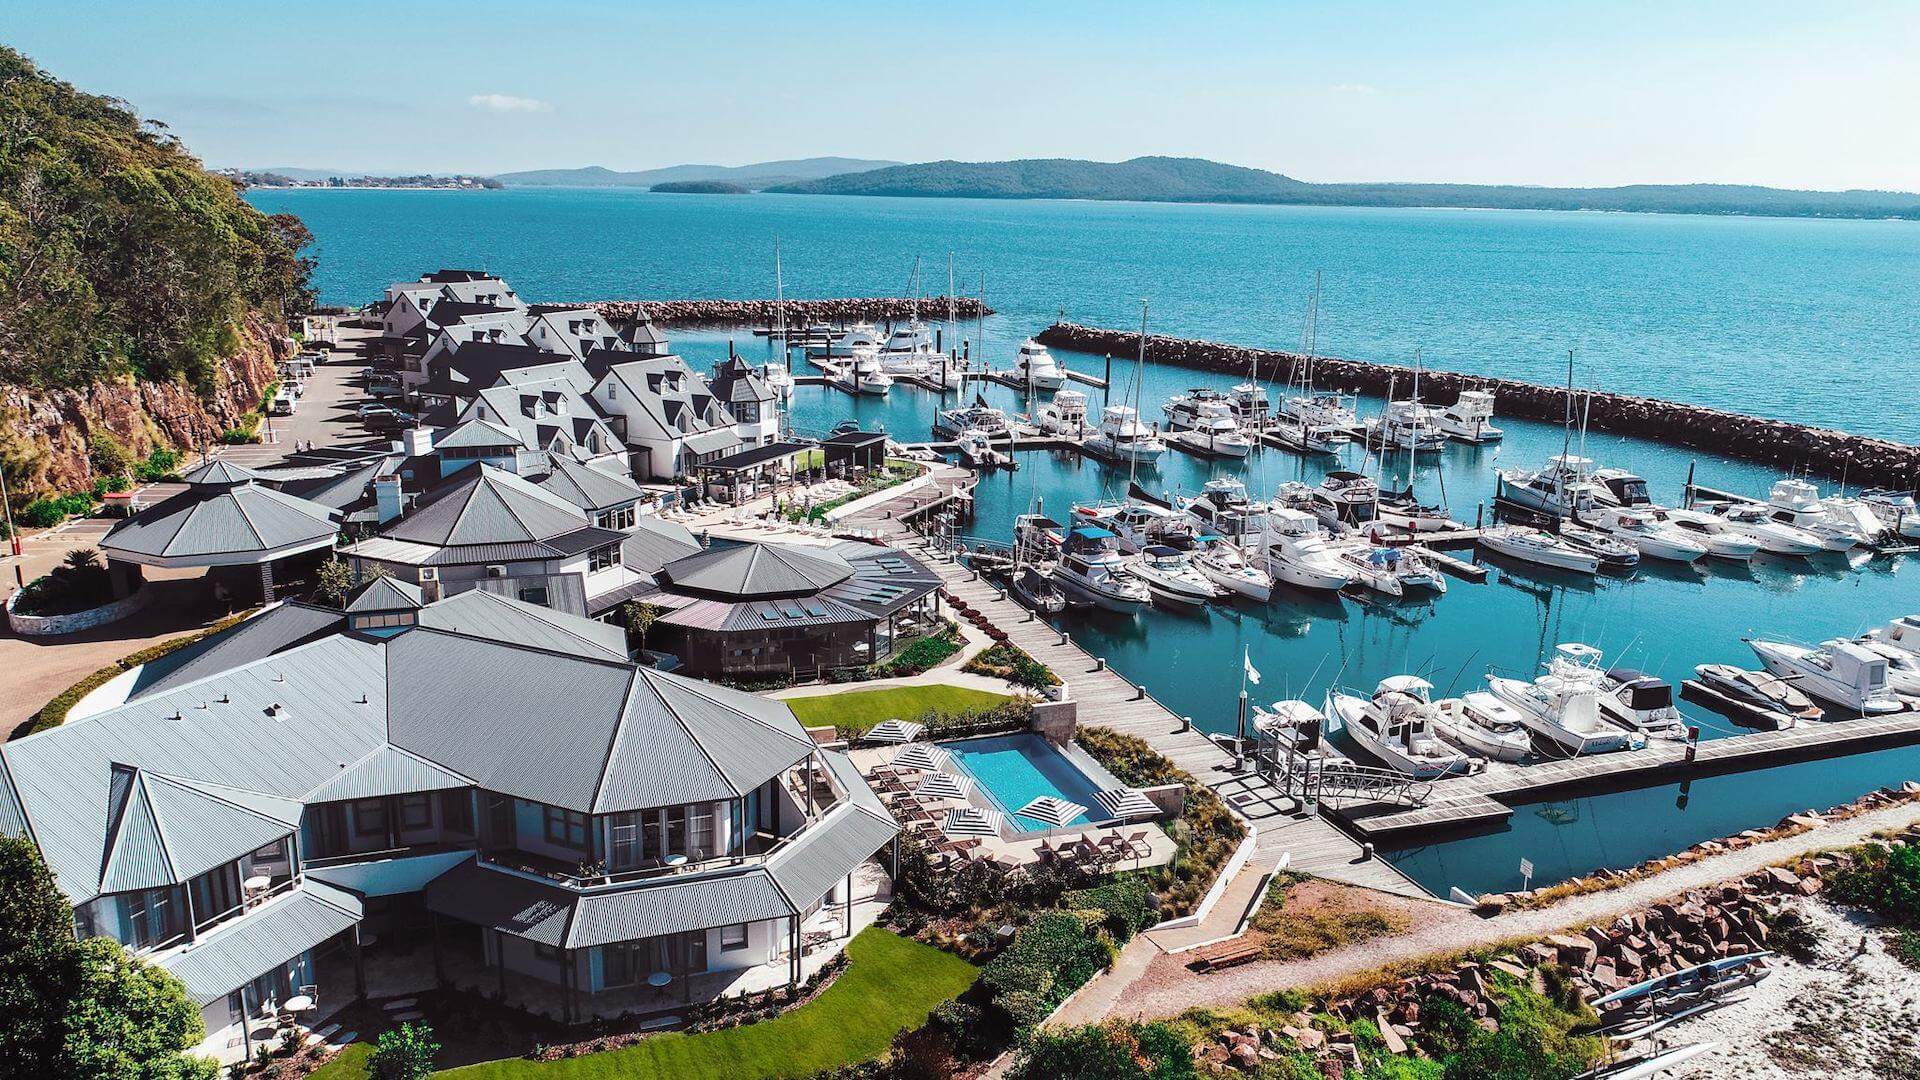 Stay of the Week: Anchorage Port Stephens